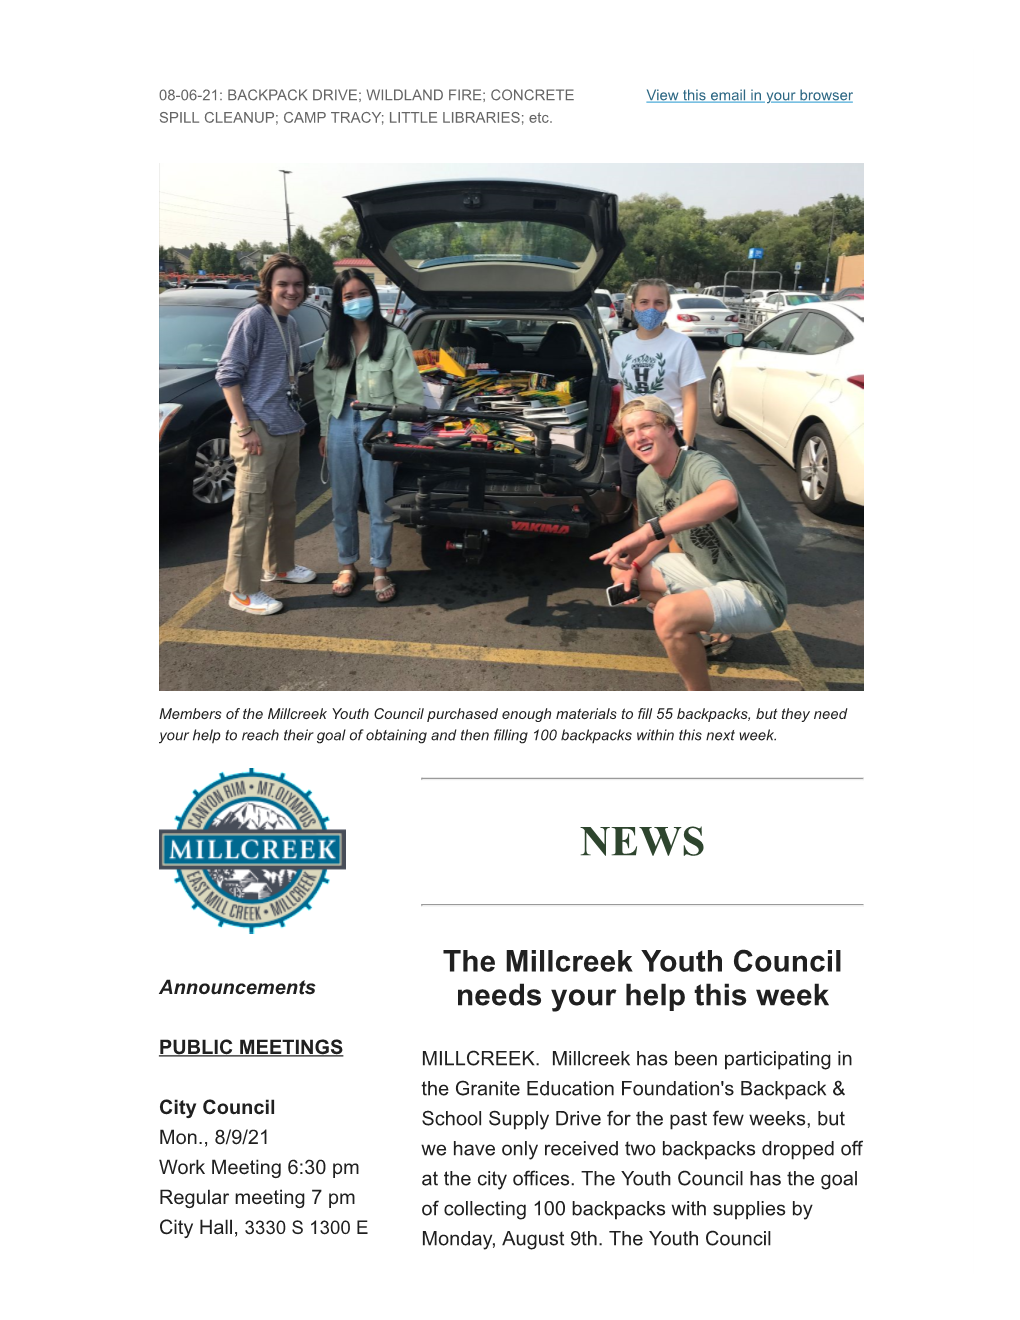 The Millcreek Youth Council Needs Your Help This Week